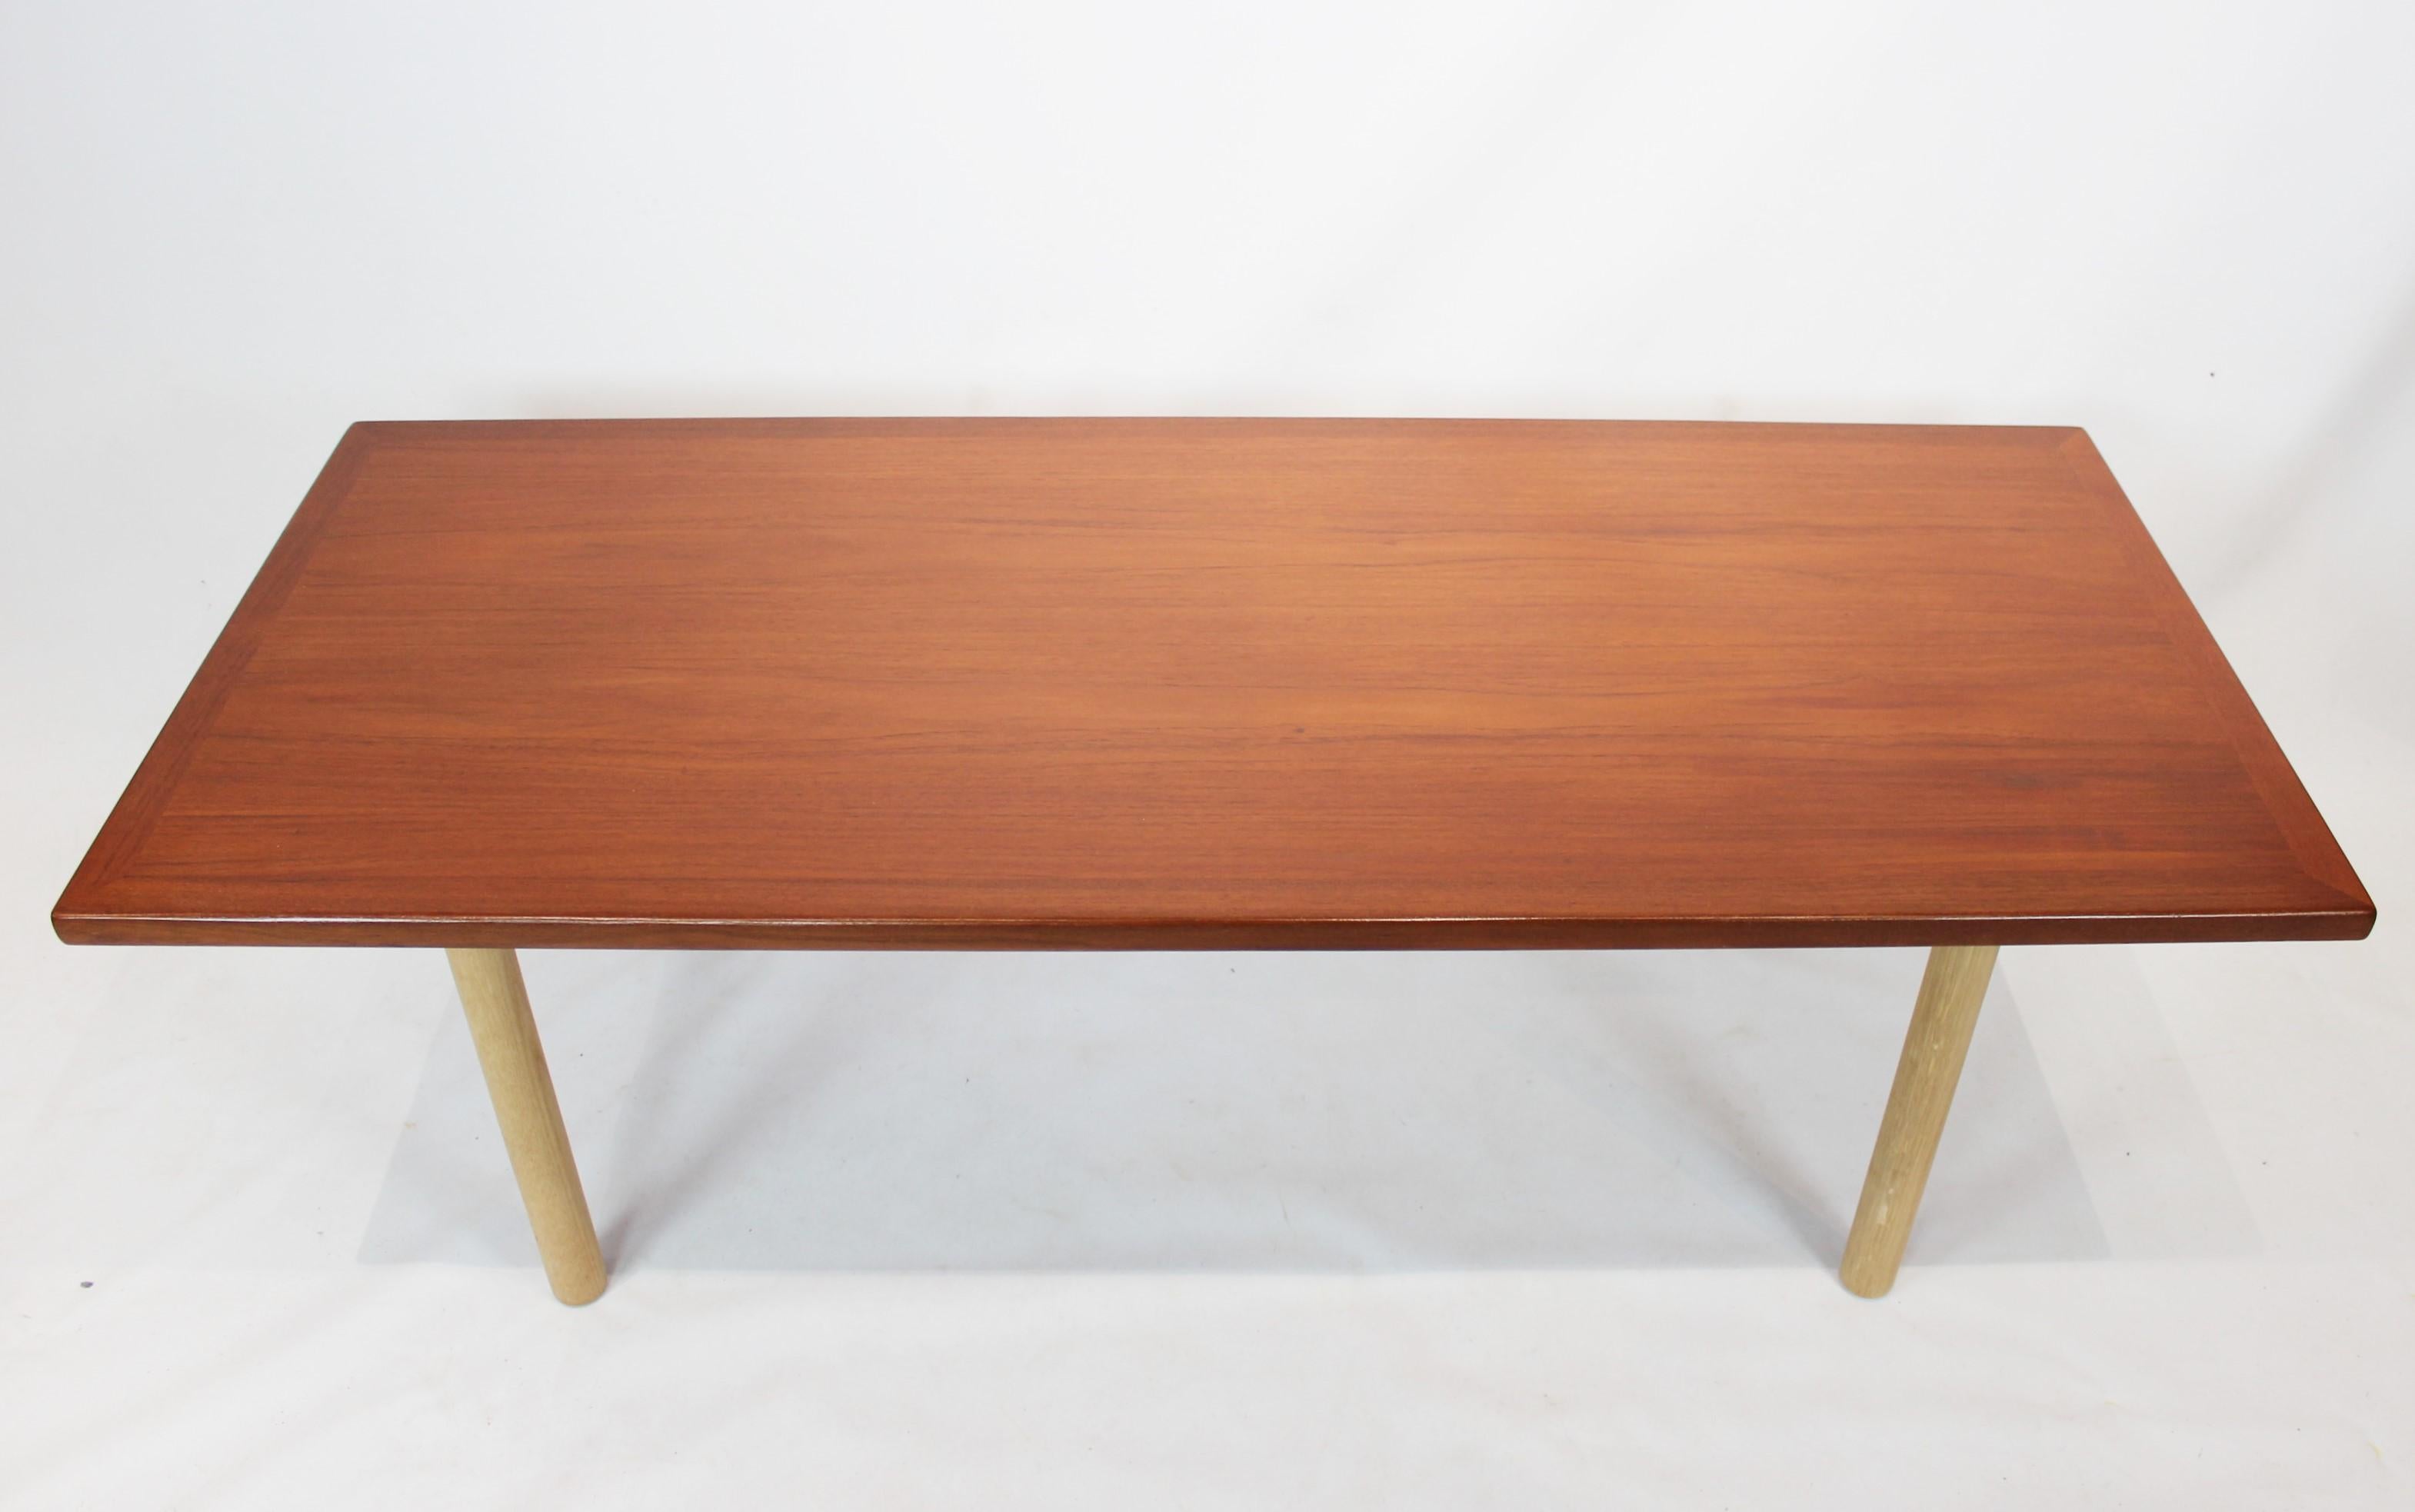 Exquisite Coffee Table from the 1960s, crafted in a blend of teak and oak, designed by the legendary Danish furniture designer Hans J. Wegner and manufactured by Andreas Tuck.

This stunning piece showcases Wegner's iconic design ethos, blending the